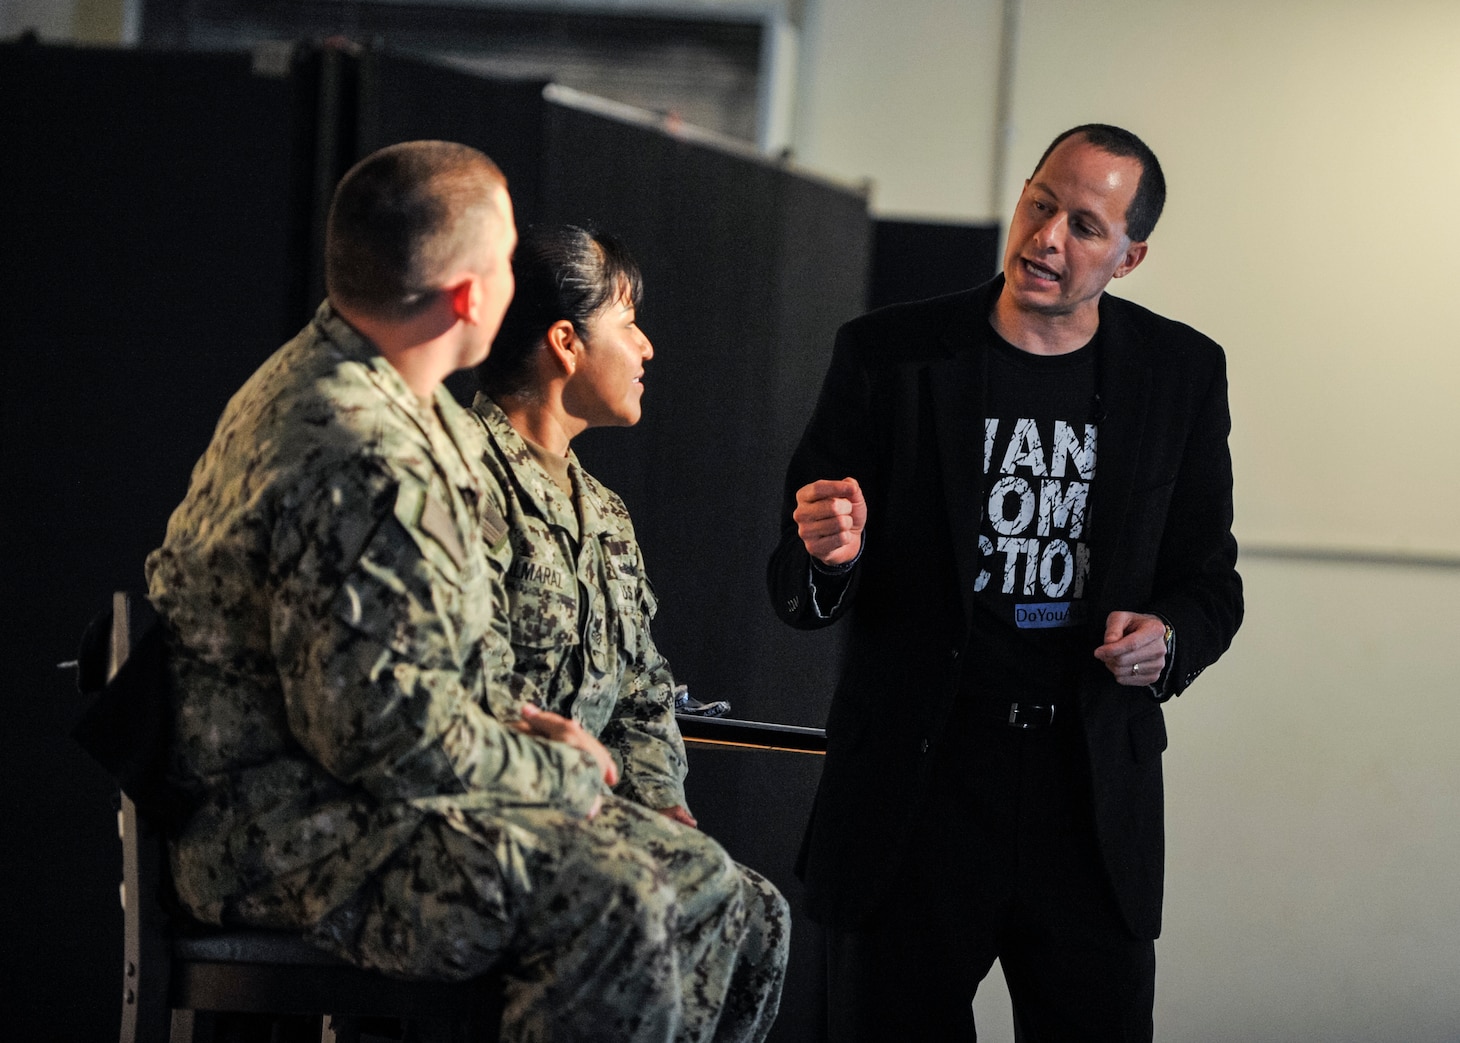 Mike Domitrz, right, delivers the interactive show "Can I Kiss You?" to service members at Camp Lemonnier, Djibouti on March 6, 2014.